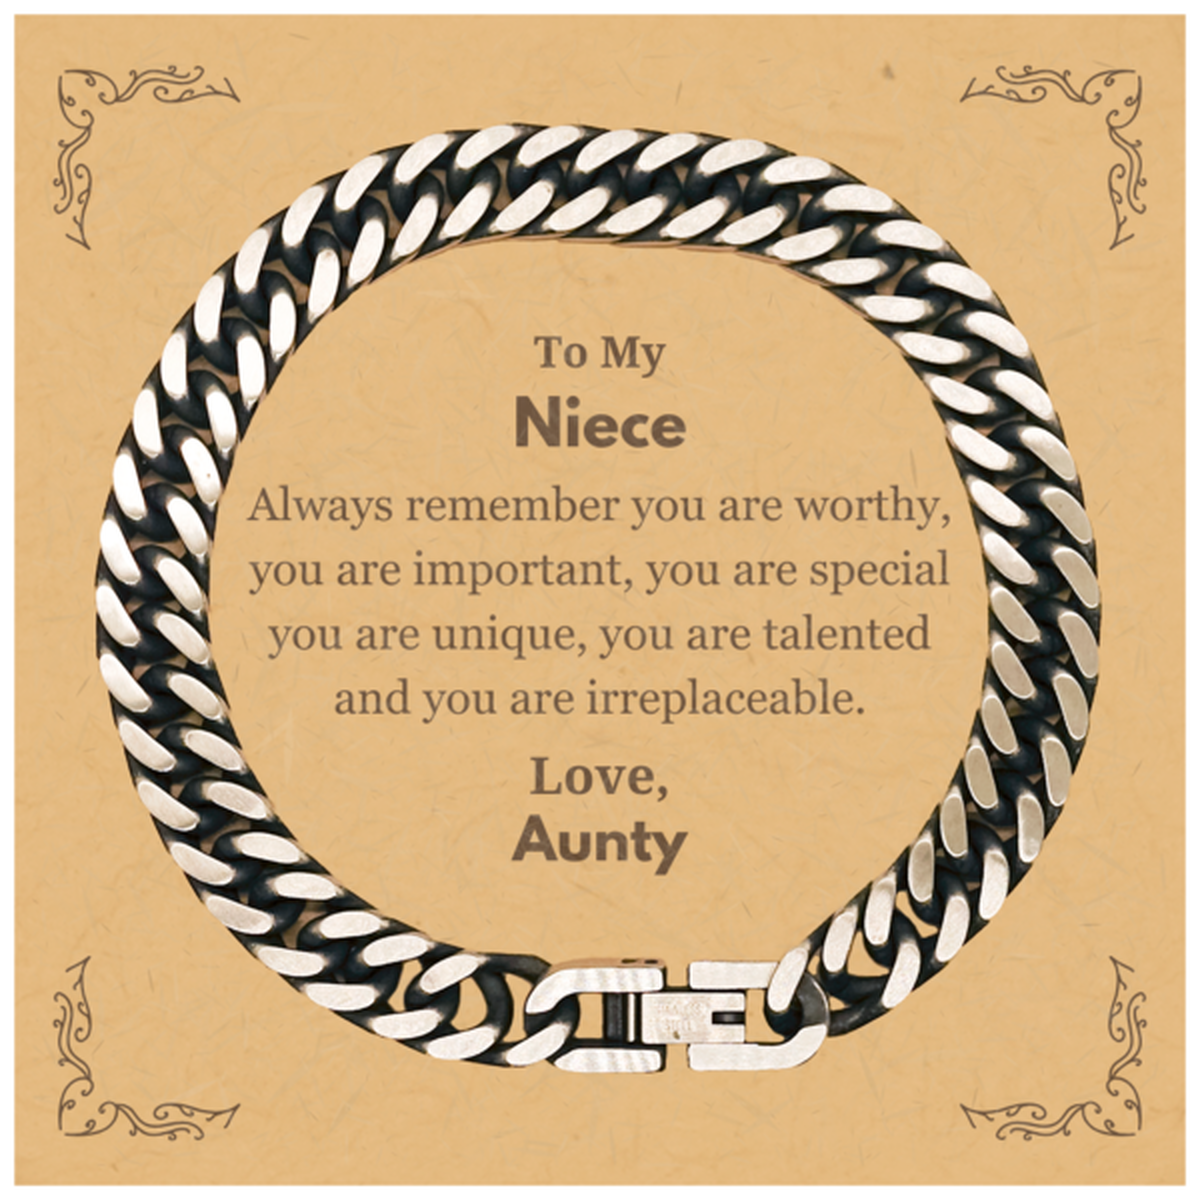 Niece Birthday Gifts from Aunty, Inspirational Cuban Link Chain Bracelet for Niece Christmas Graduation Gifts for Niece Always remember you are worthy, you are important. Love, Aunty